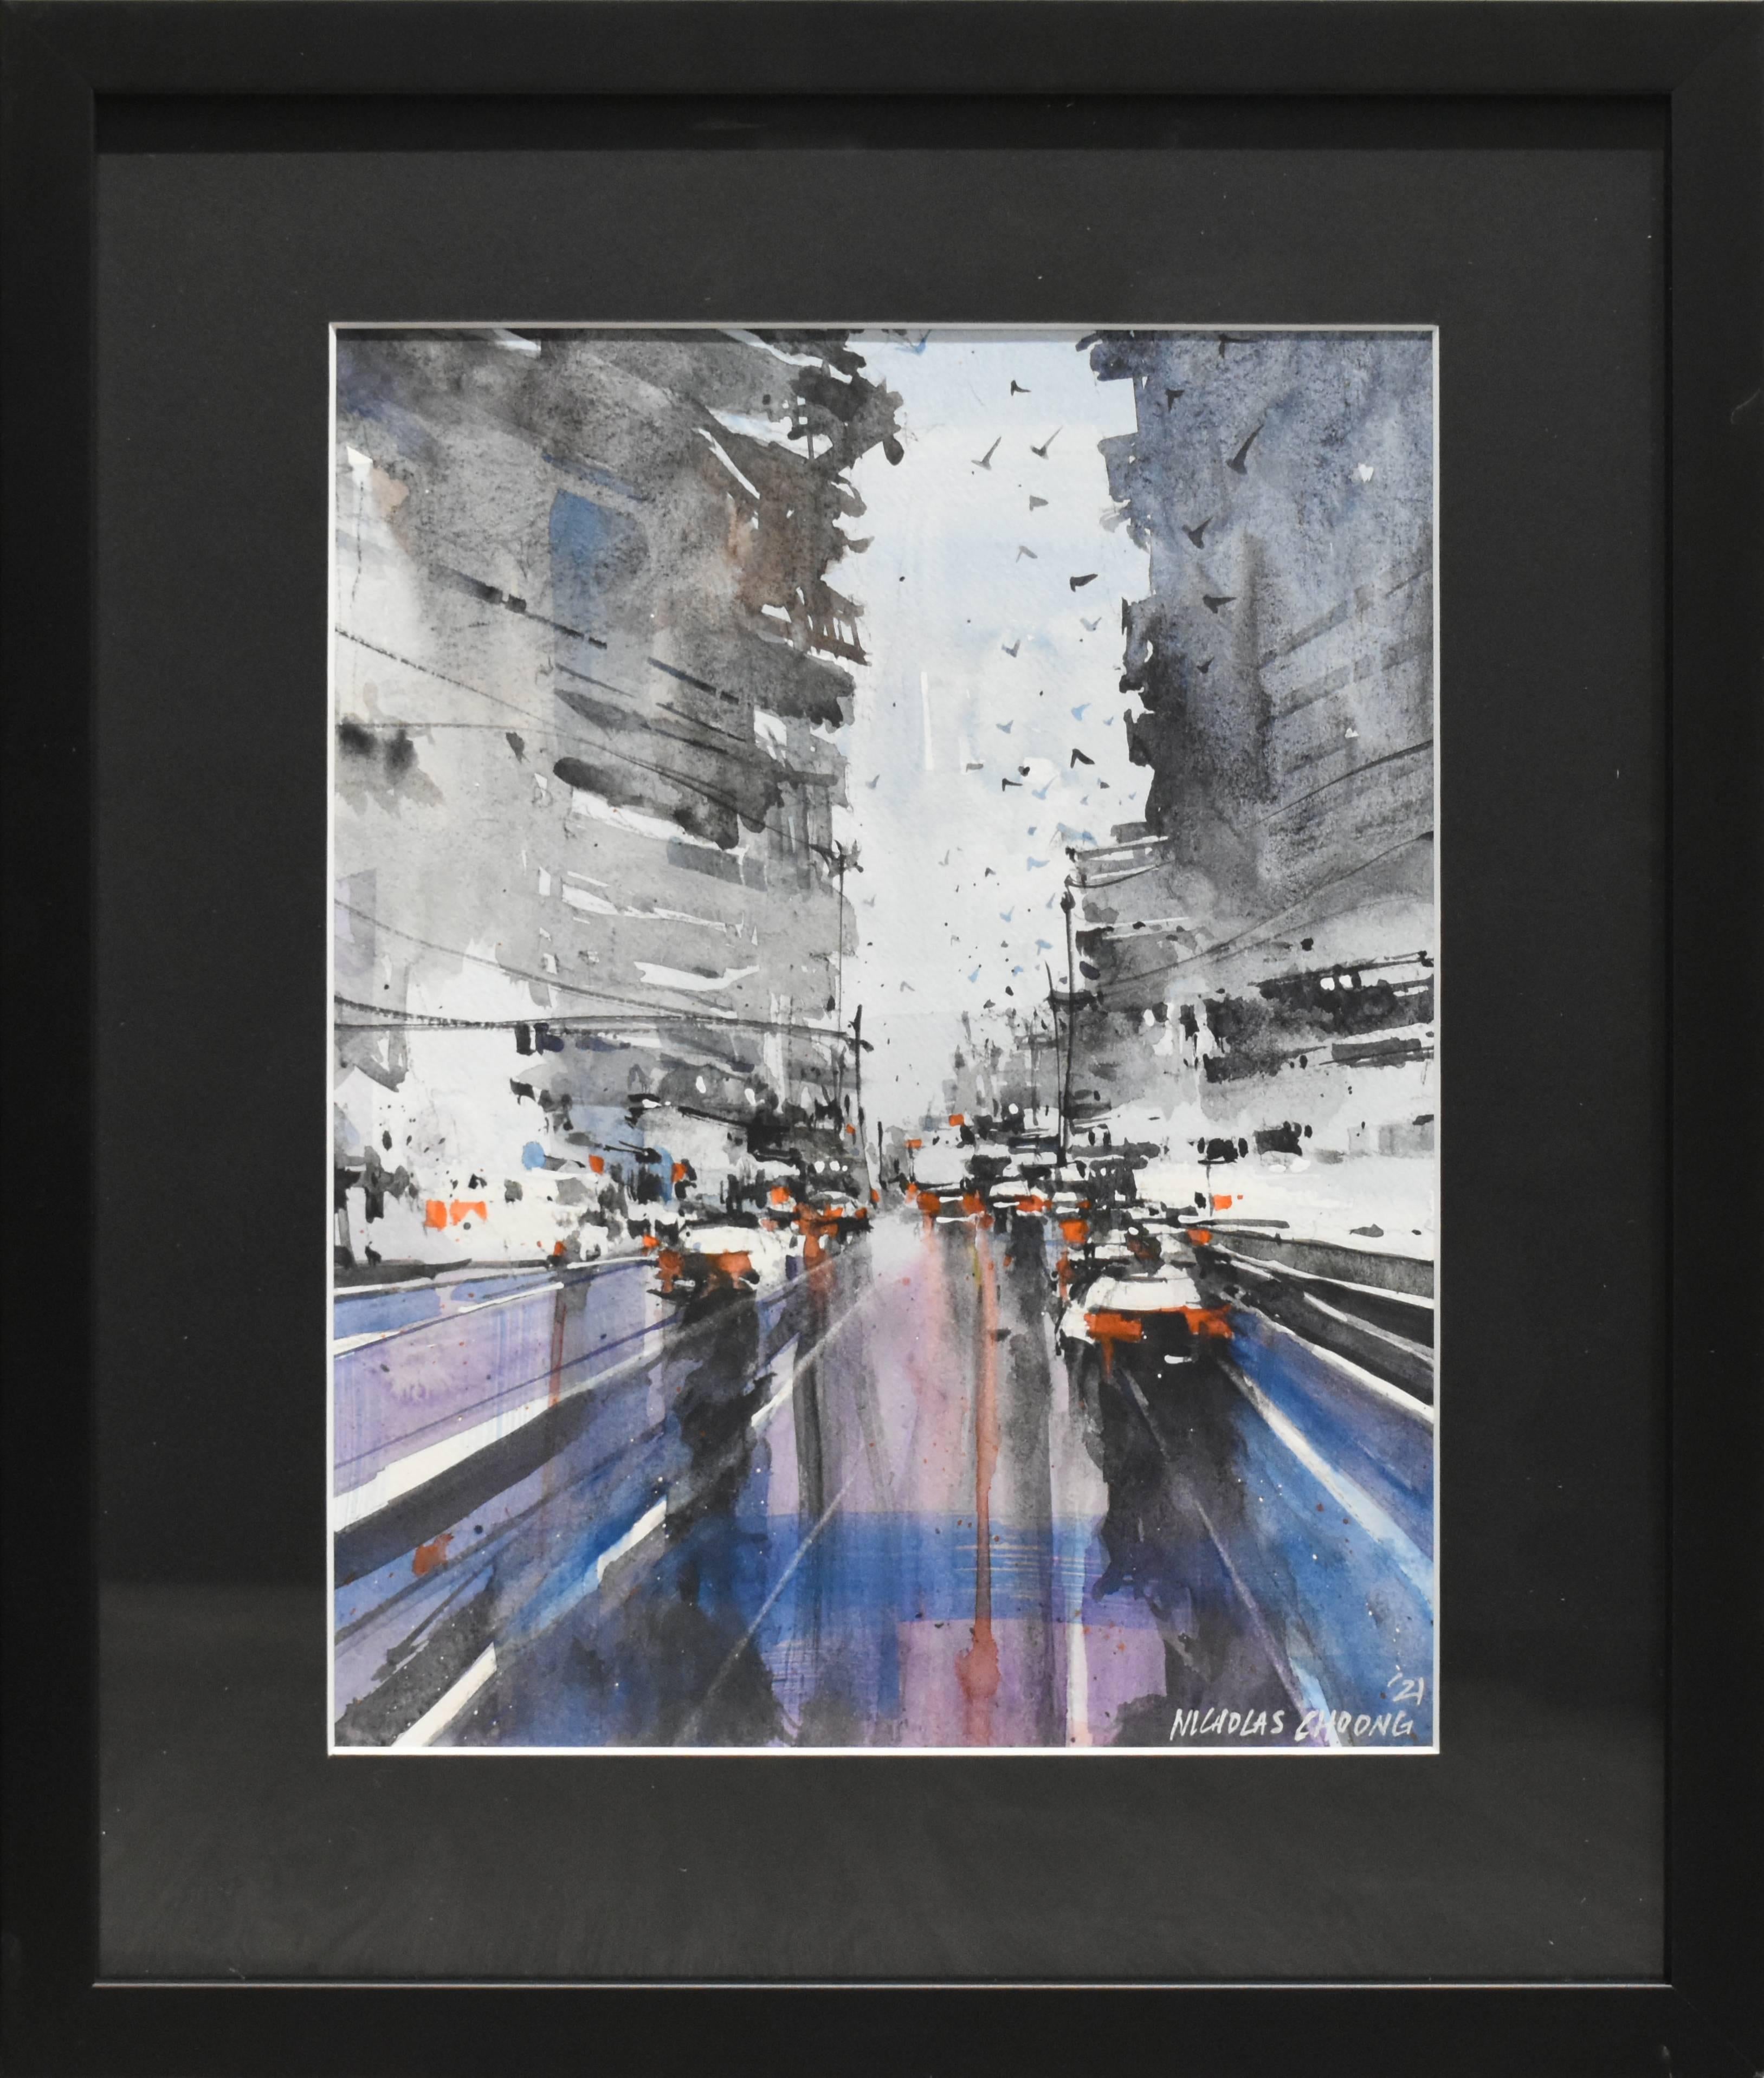 Composition #10, Reflection of Lights on the Streets in Abstract Expression  - Painting by Nicholas Choong